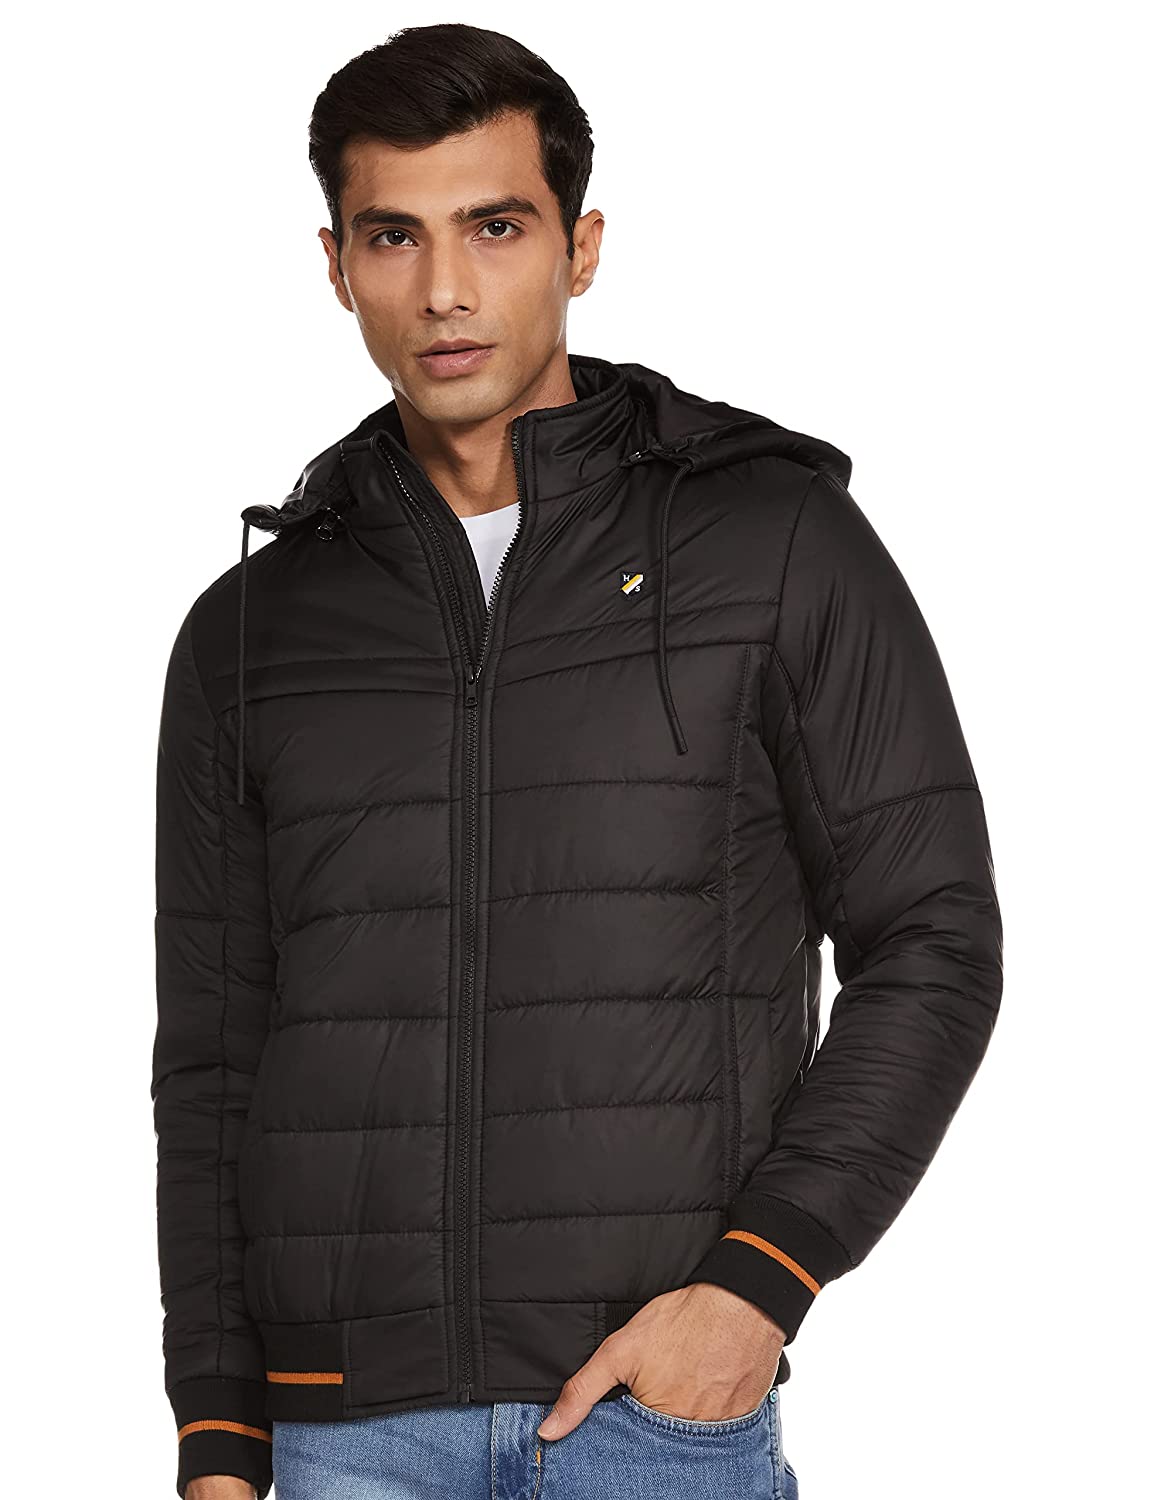 Top 10 Winter Jackets For Men, Check Before Buying